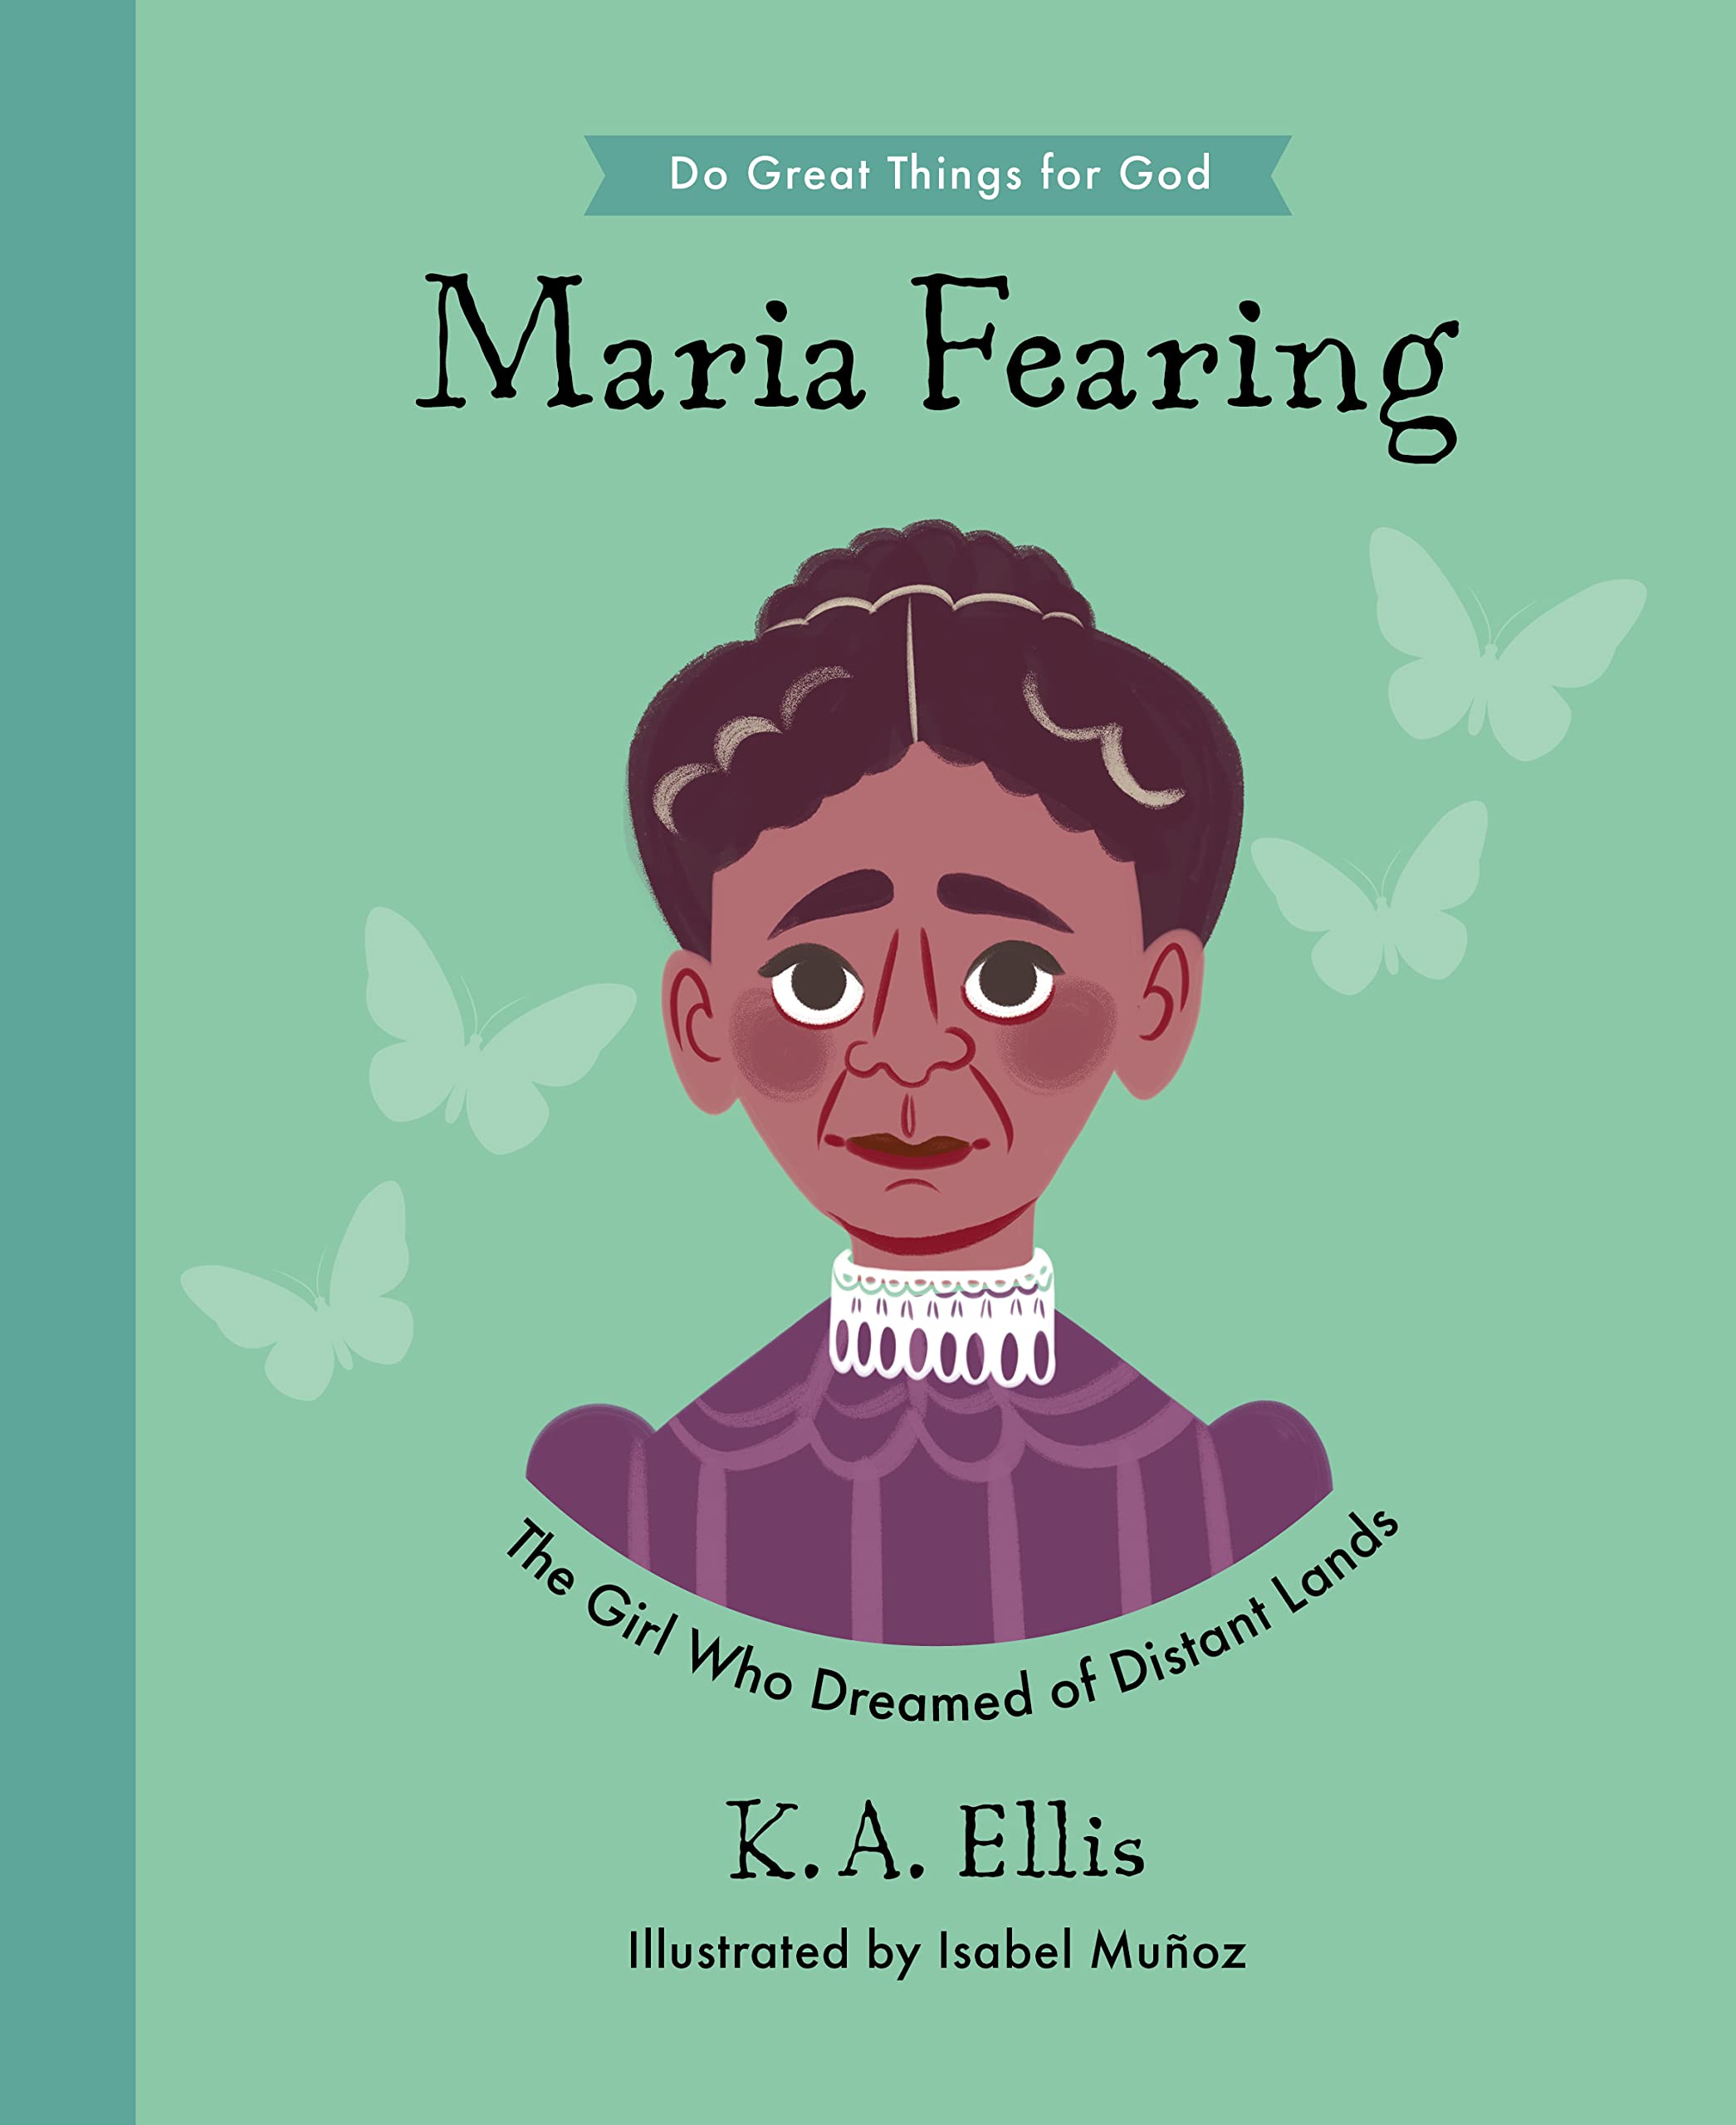 Image of Maria Fearing: The Girl Who Dreamed of Distant Lands (Do Great Things for God)